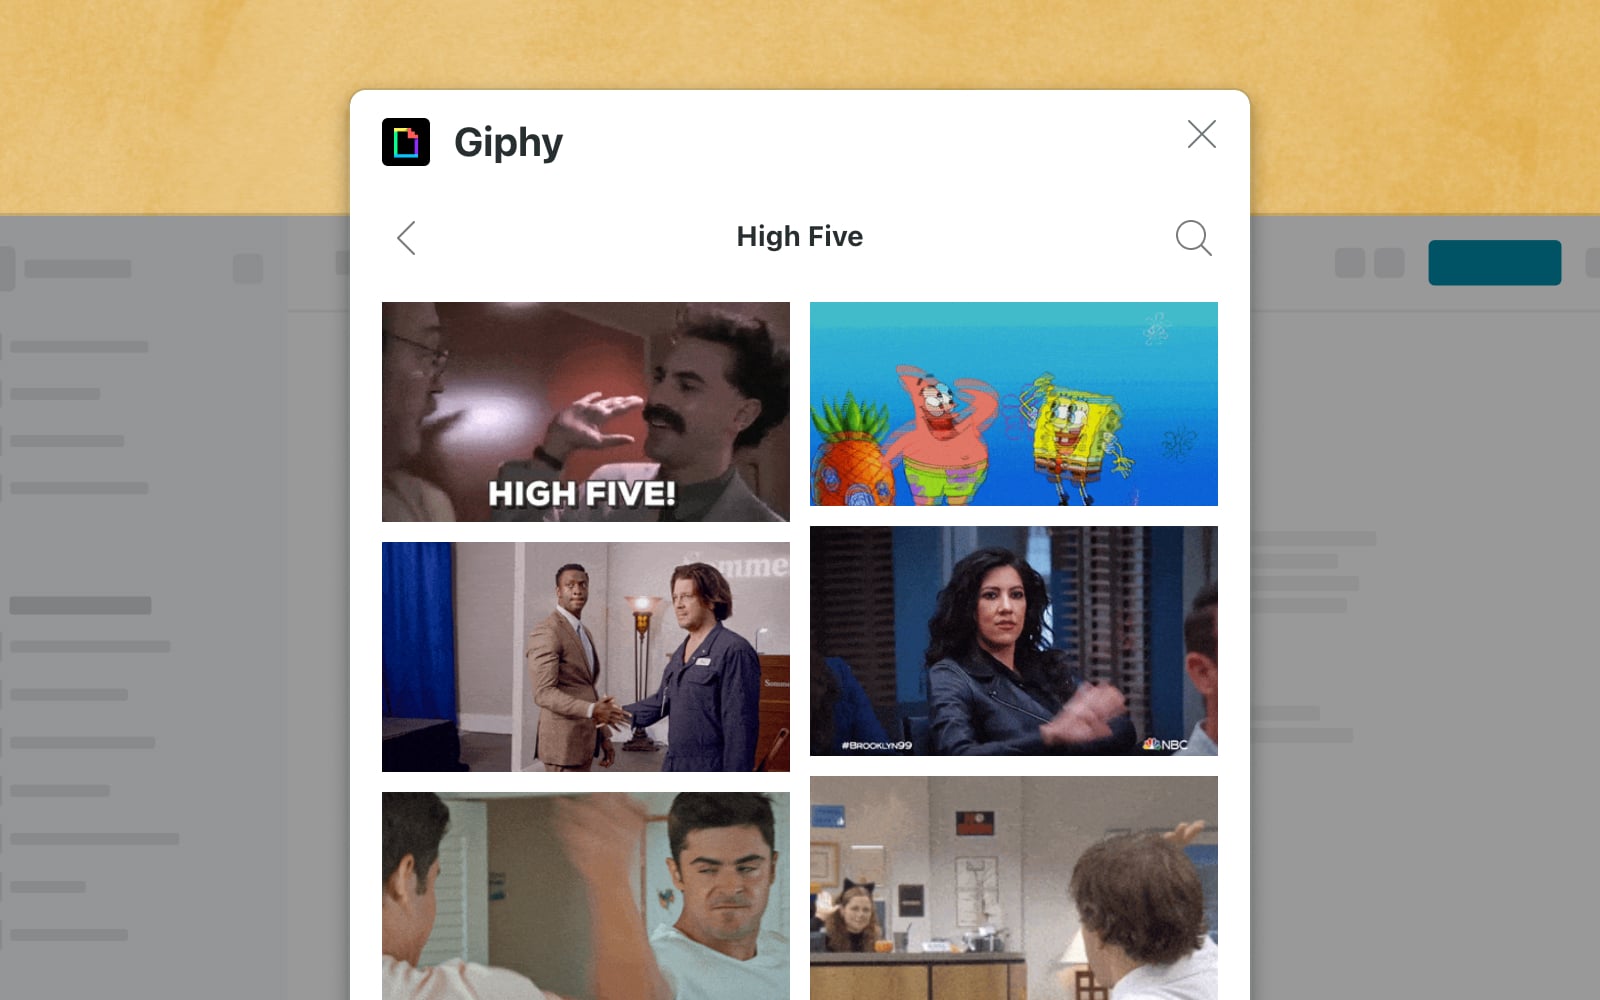 Giphy, Software